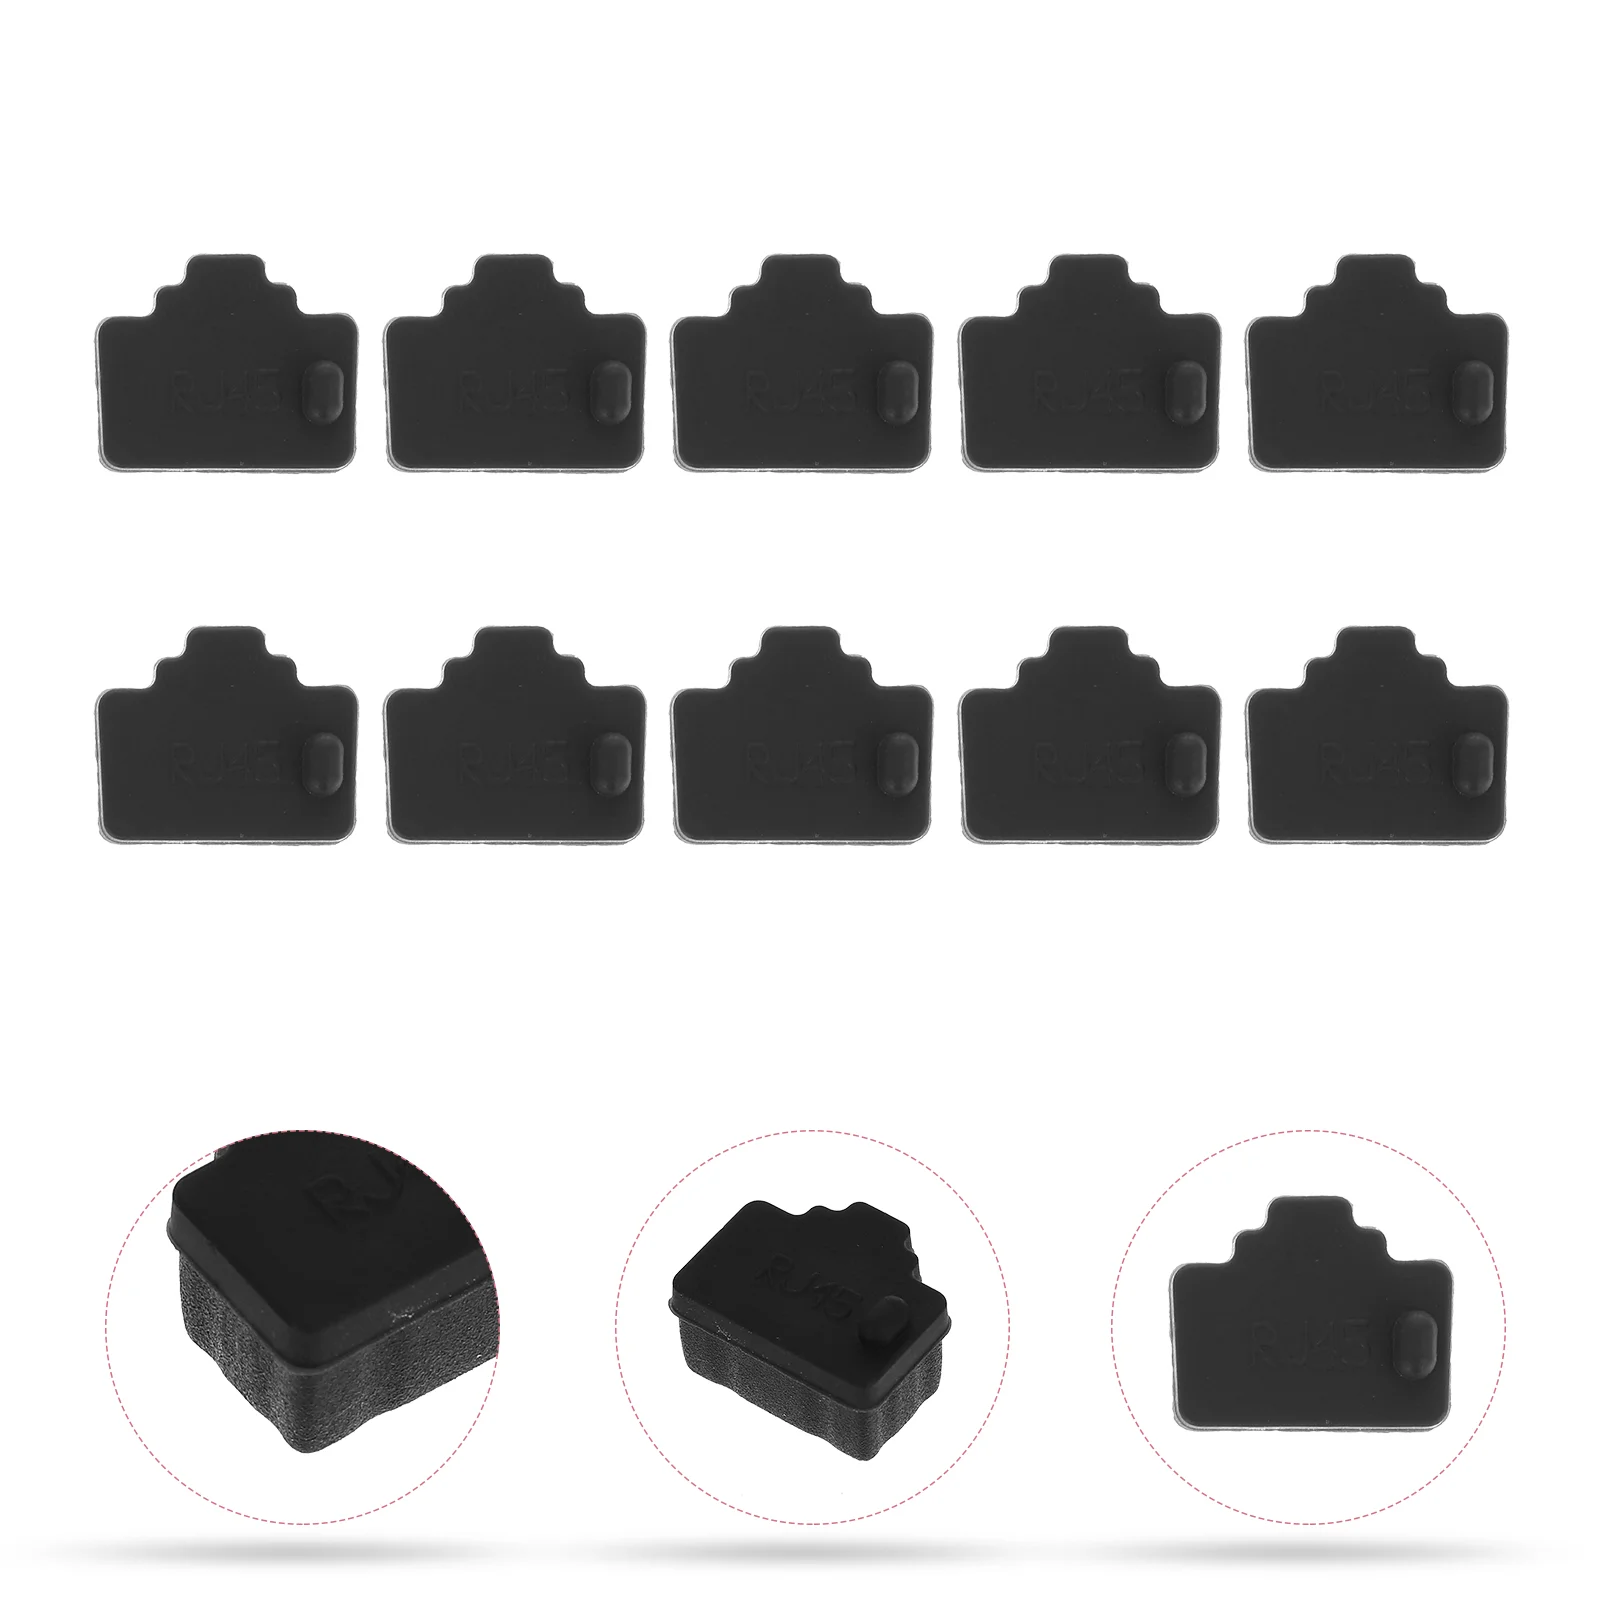 

20 Pcs Switch Ethernet Receptacle Interface Caps Router Port Dust Covers Ethernet Hub Stoppers Network Silica Gel